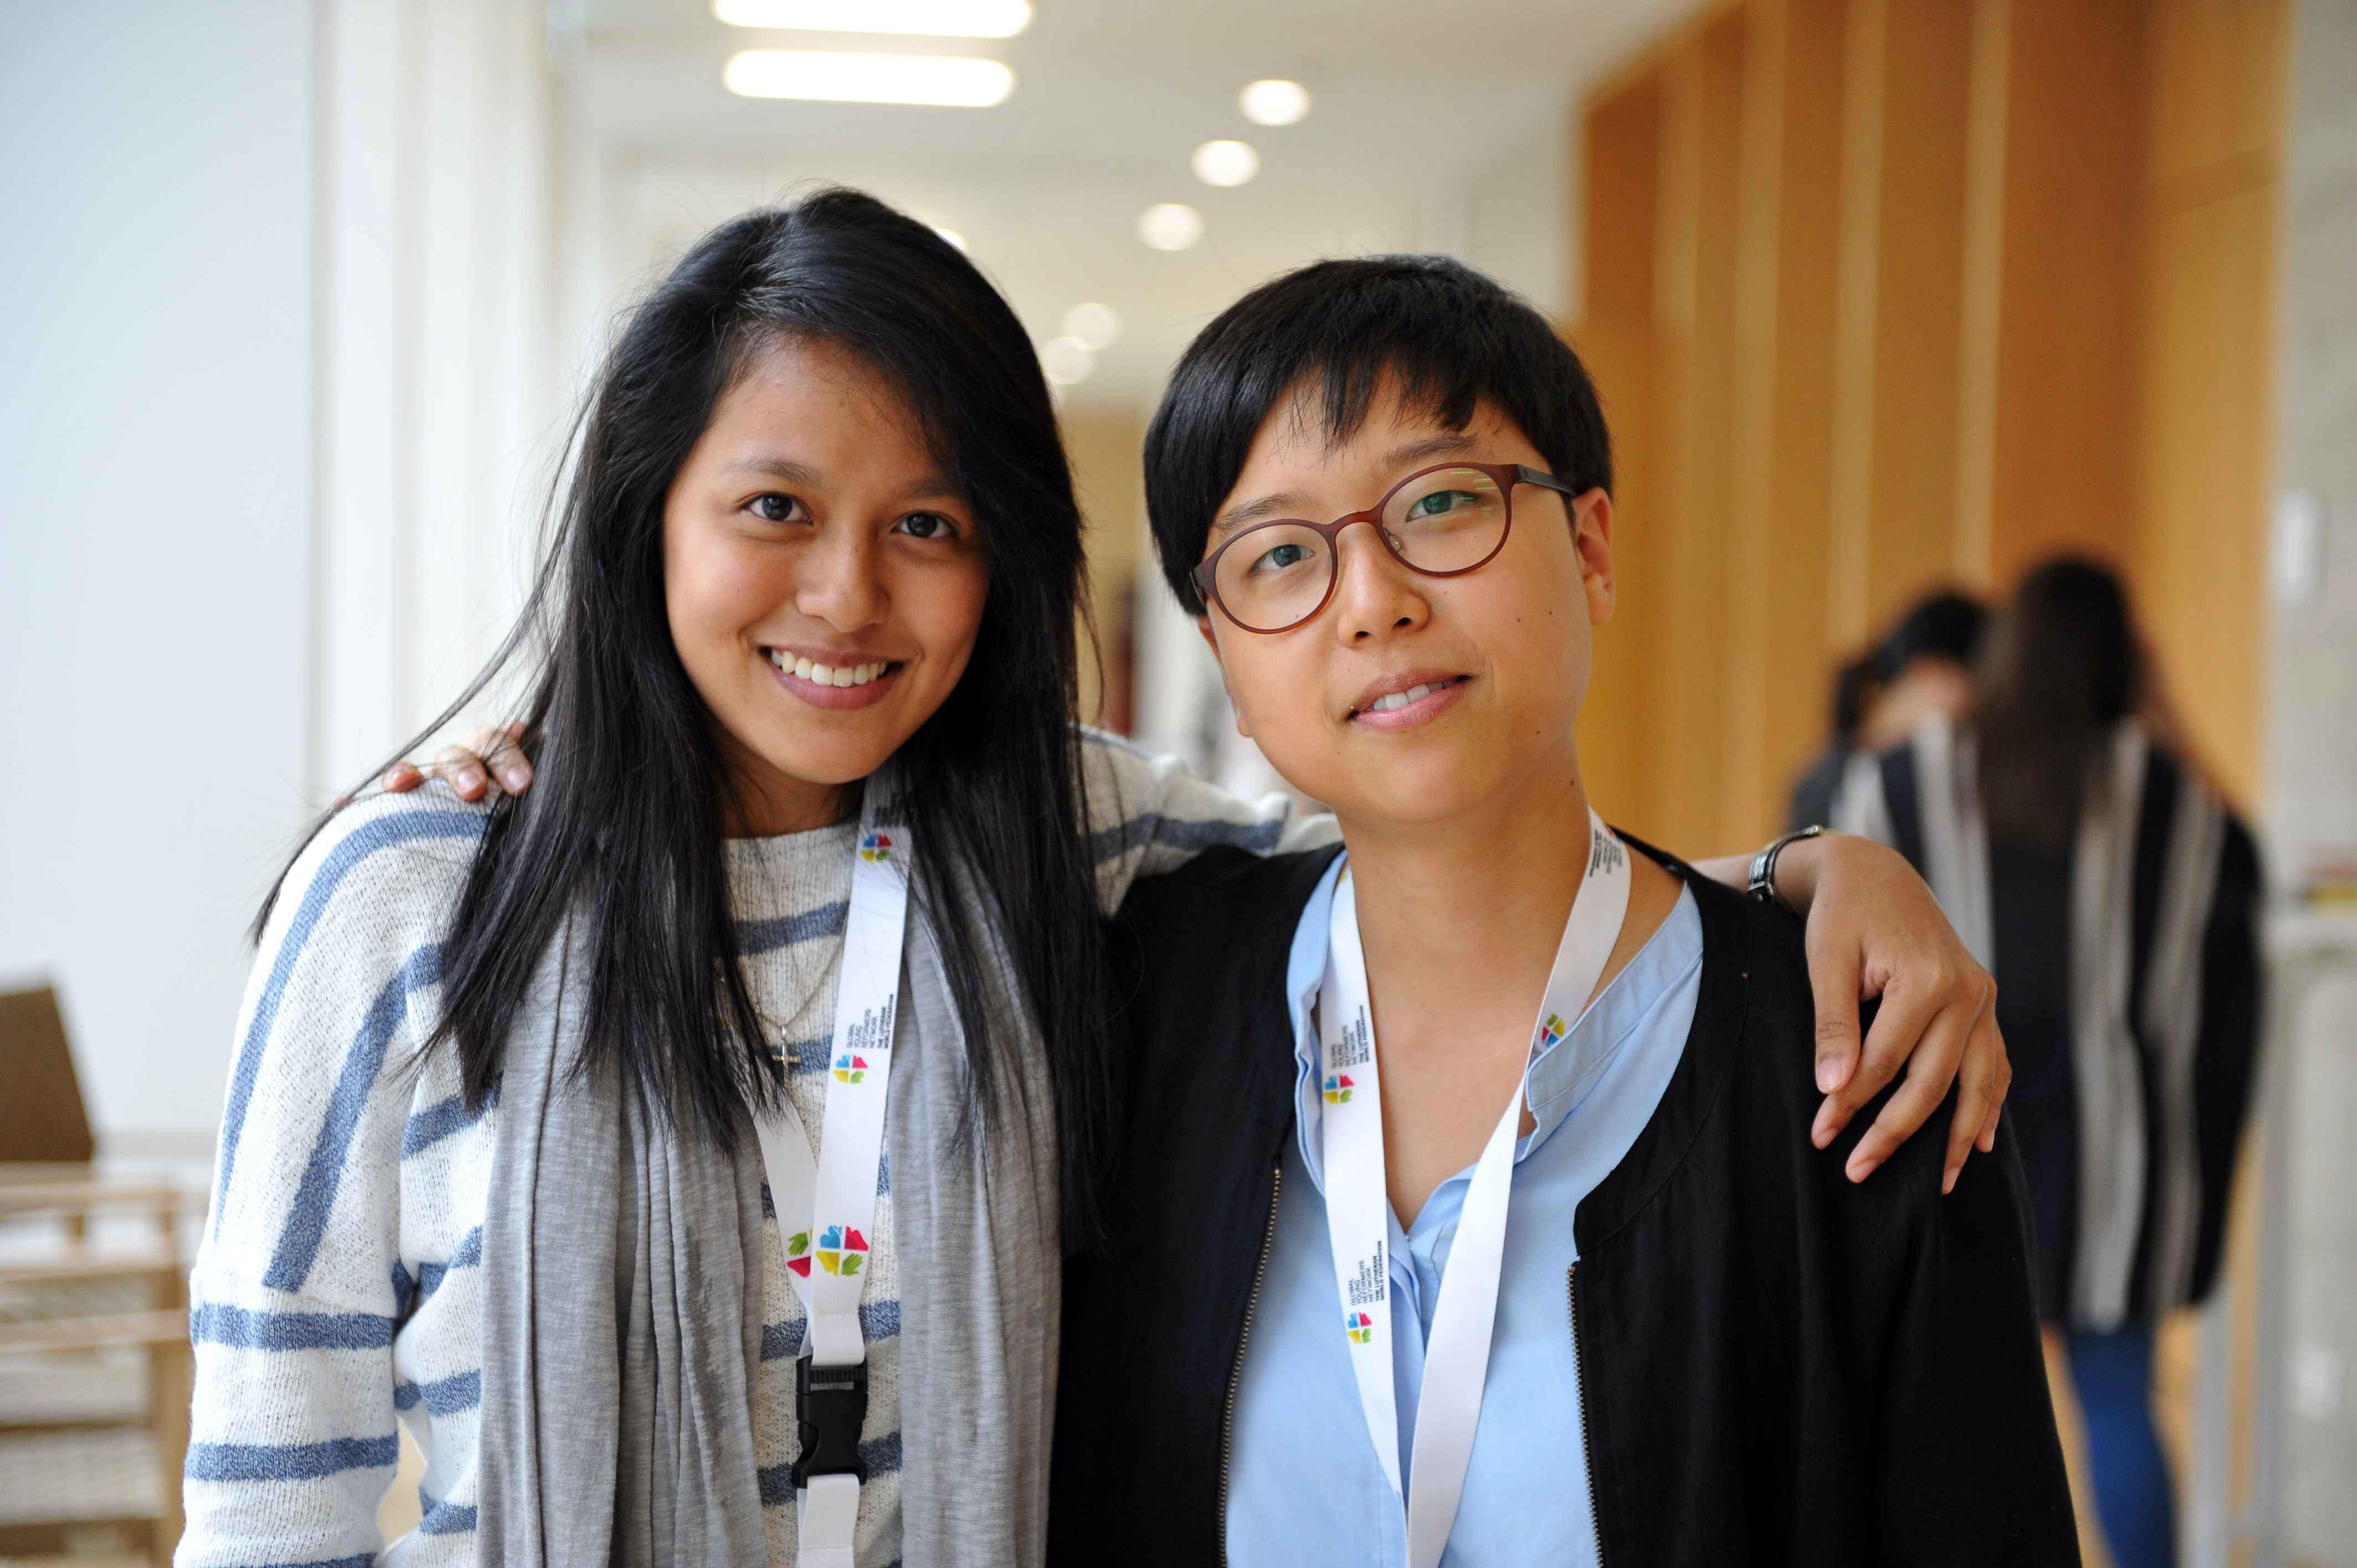 LWF Vice-President for Asia Eun-hae Kwon, right, with Sumita Chin, from Malaysia. Kwon says the ongoing witness of Lutherans motivates her to serve. Photo: LWF/M. Renaux